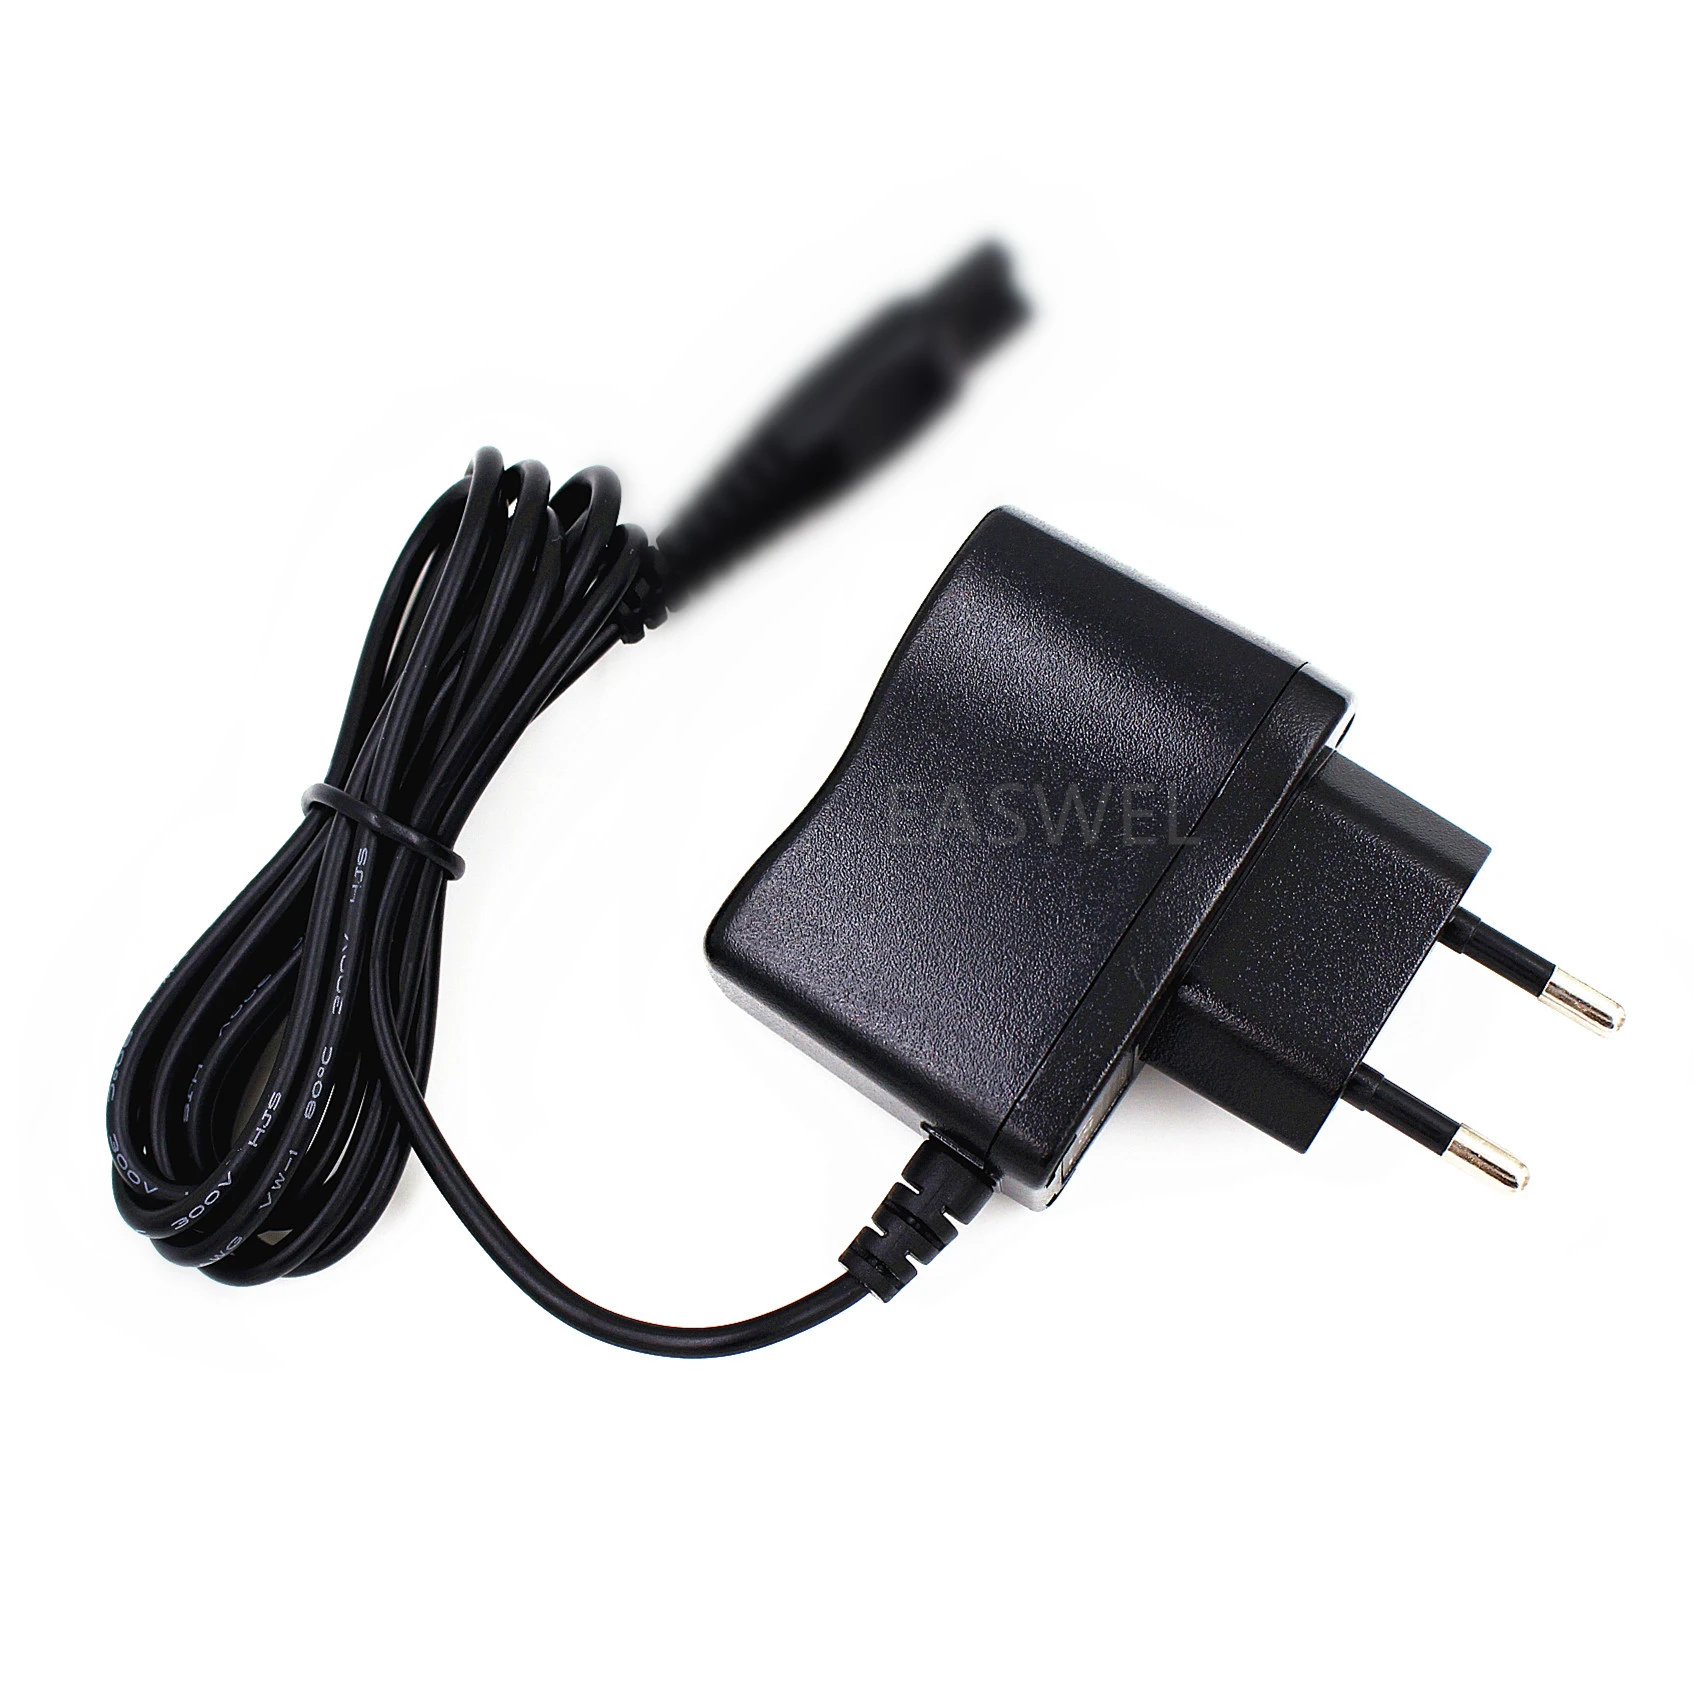 Power Supply Adapter Charger For Philips Series 5000 S5130/06 S5320/08 Bt5200/13 Bt5205/16 Pt920/19 Trimmer Shaver - Ac/dc Adapters - AliExpress